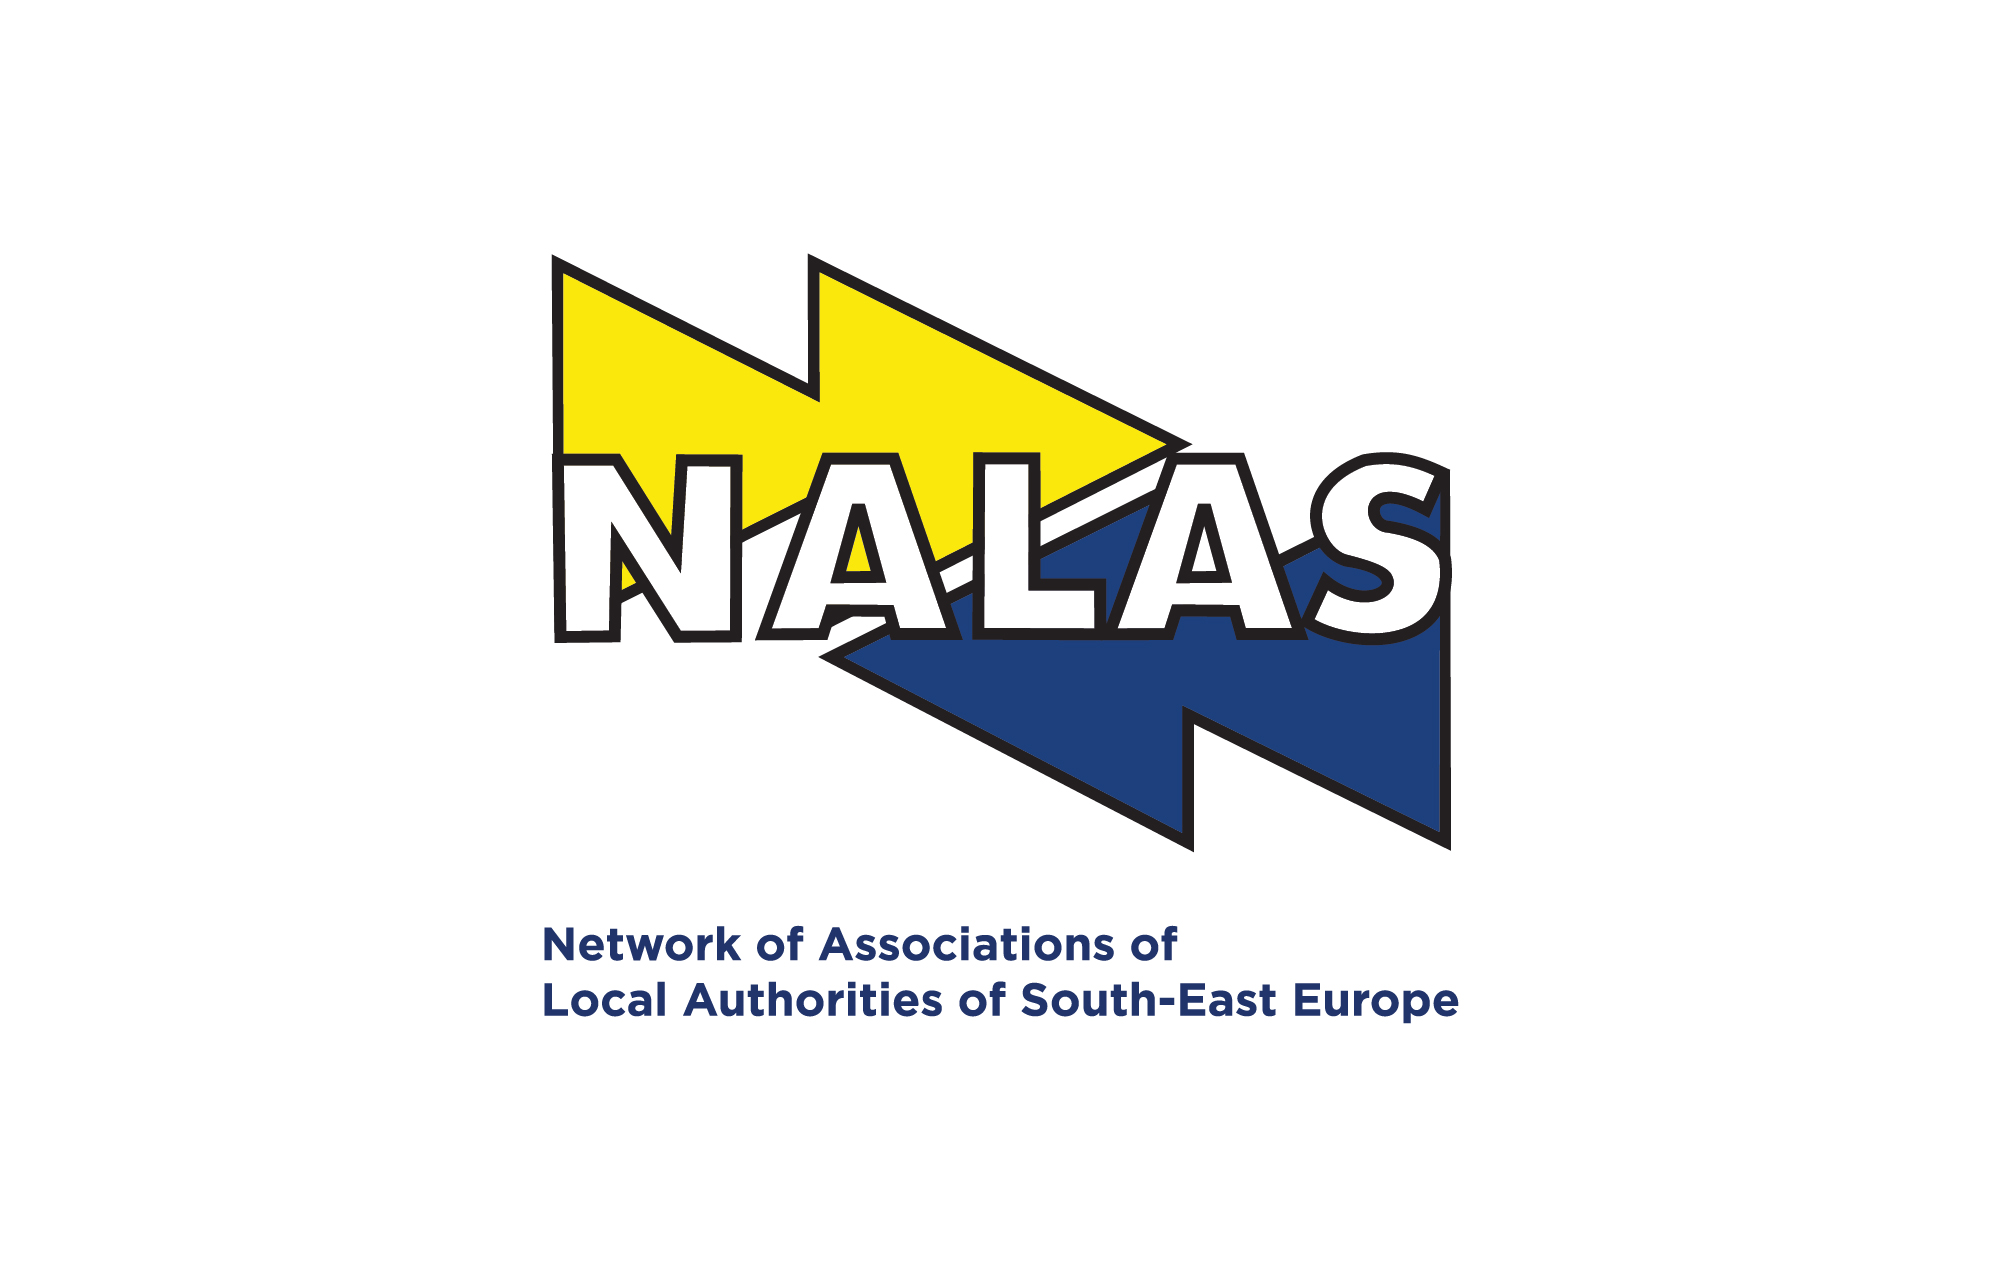 Network of Associations of Local Authorities of South-East Europe